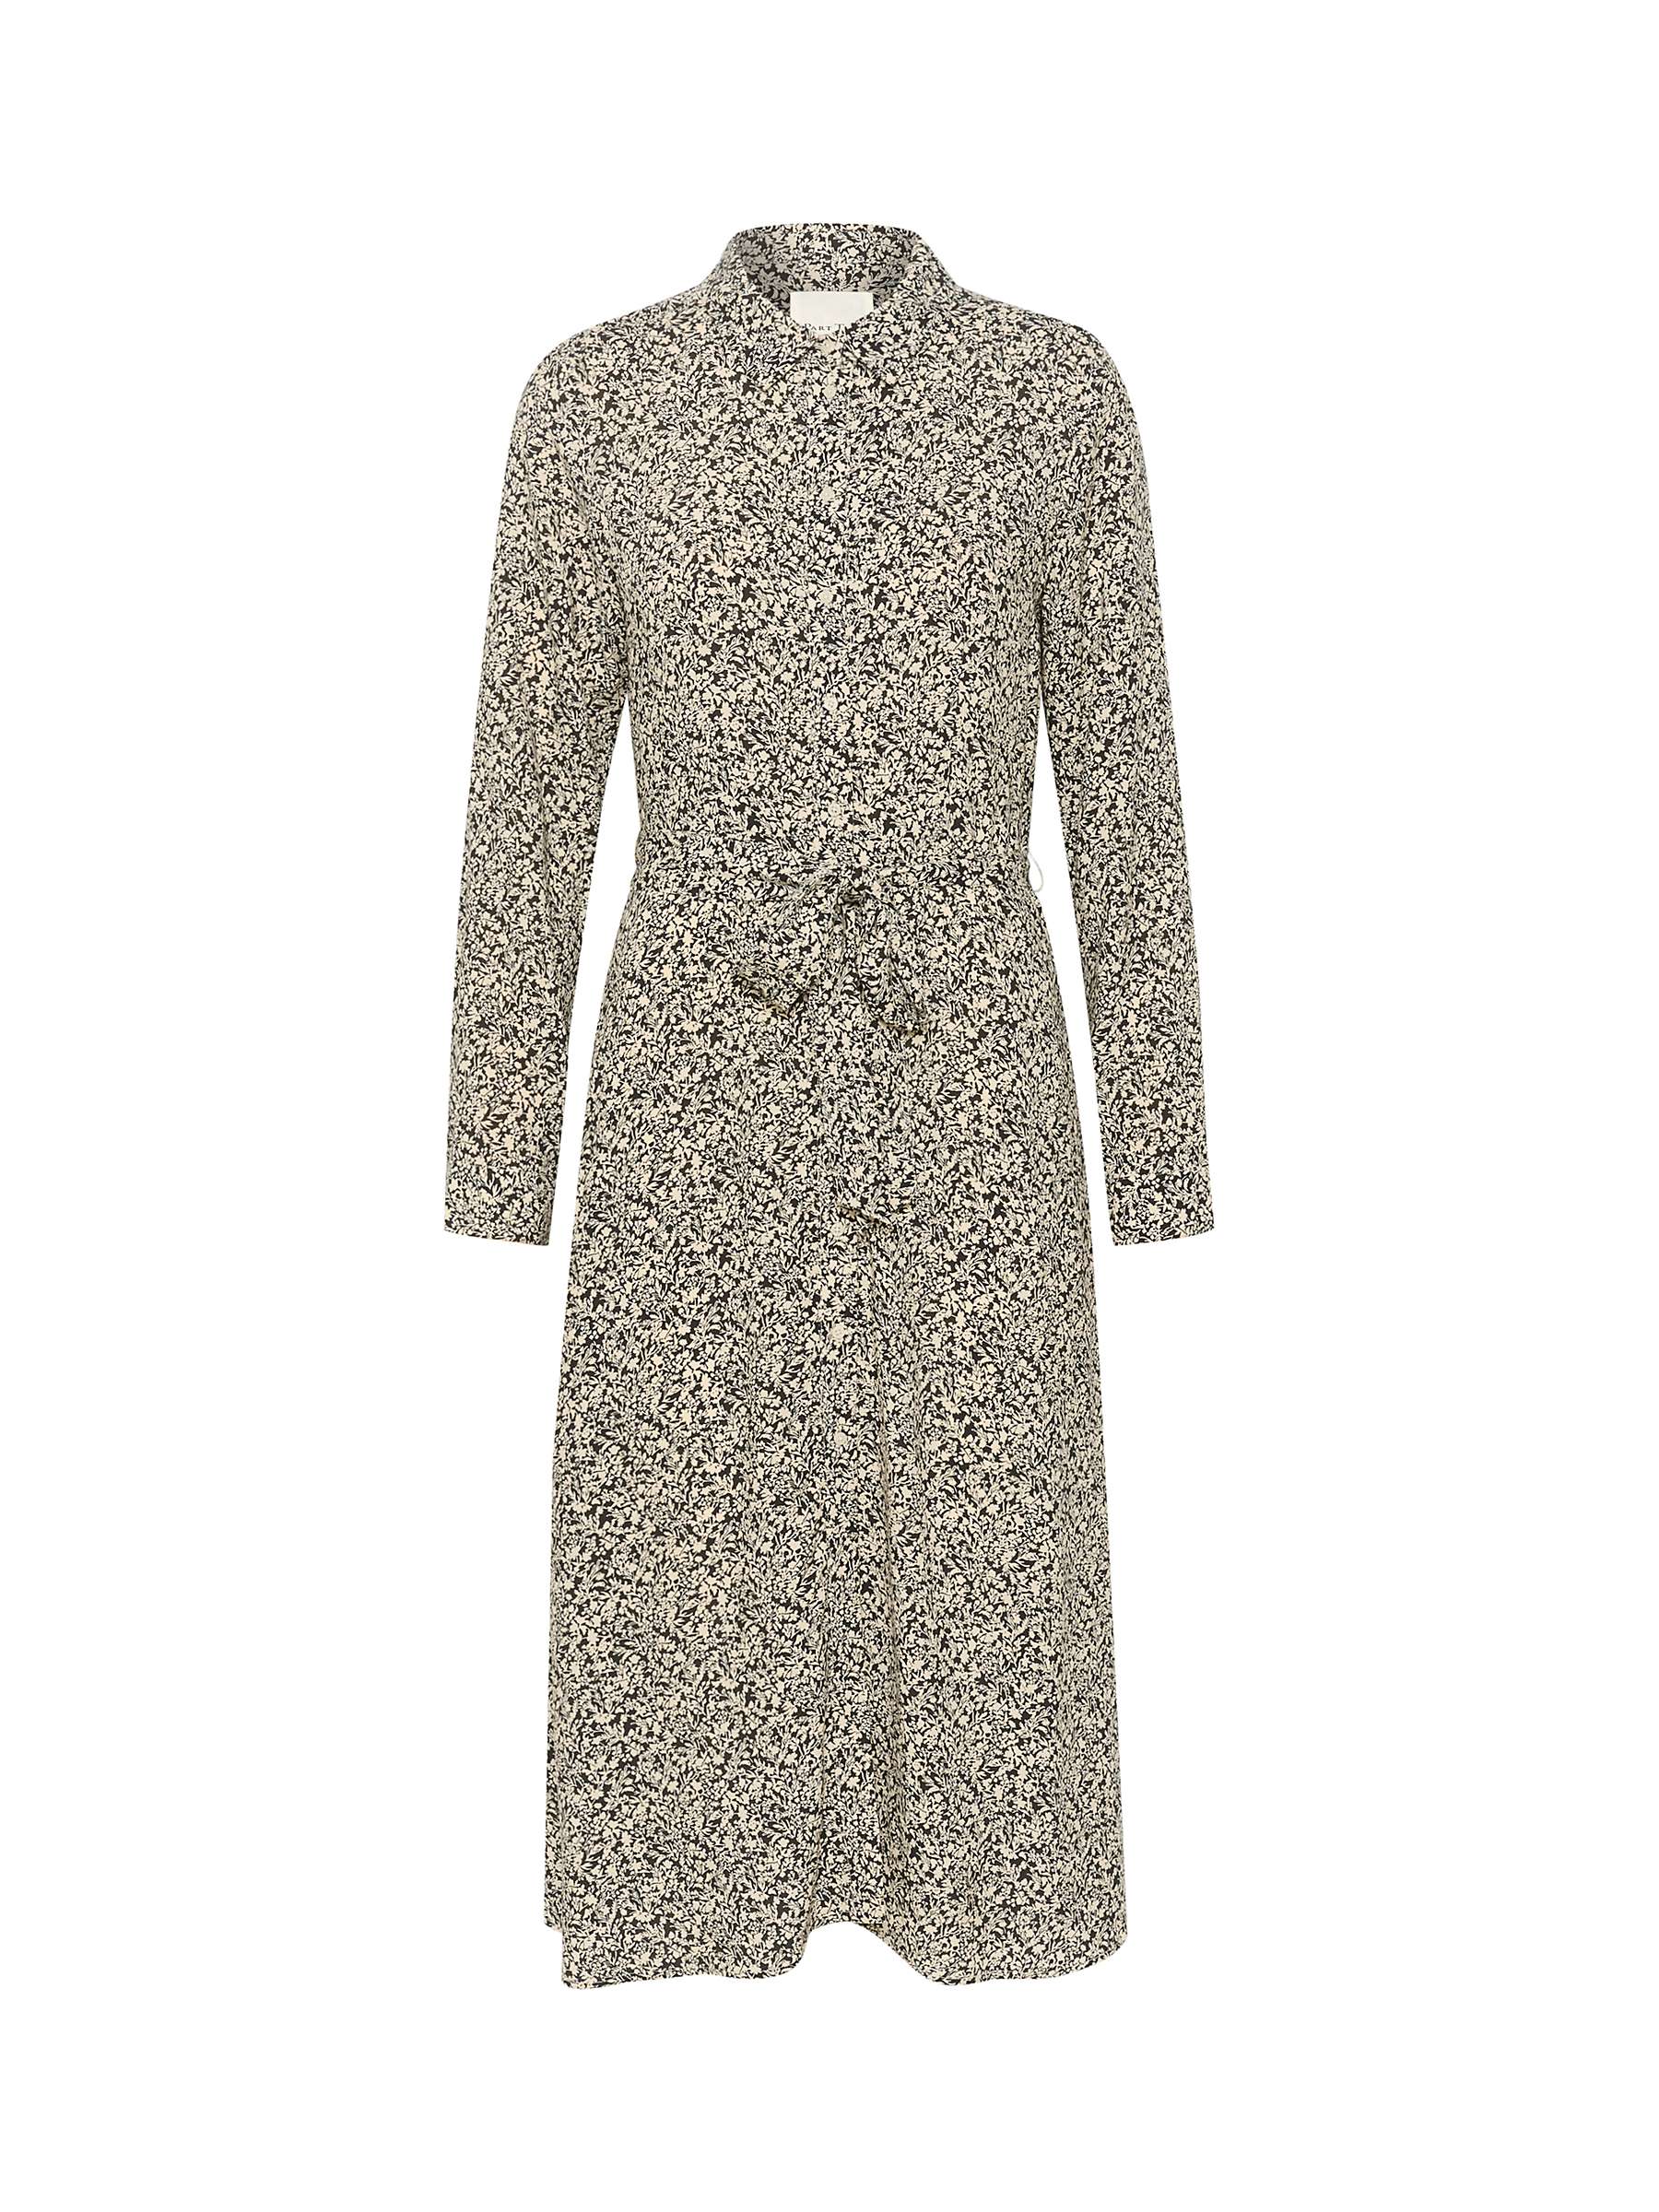 Buy Part Two Shelby Ecovero Shirt Dress Online at johnlewis.com